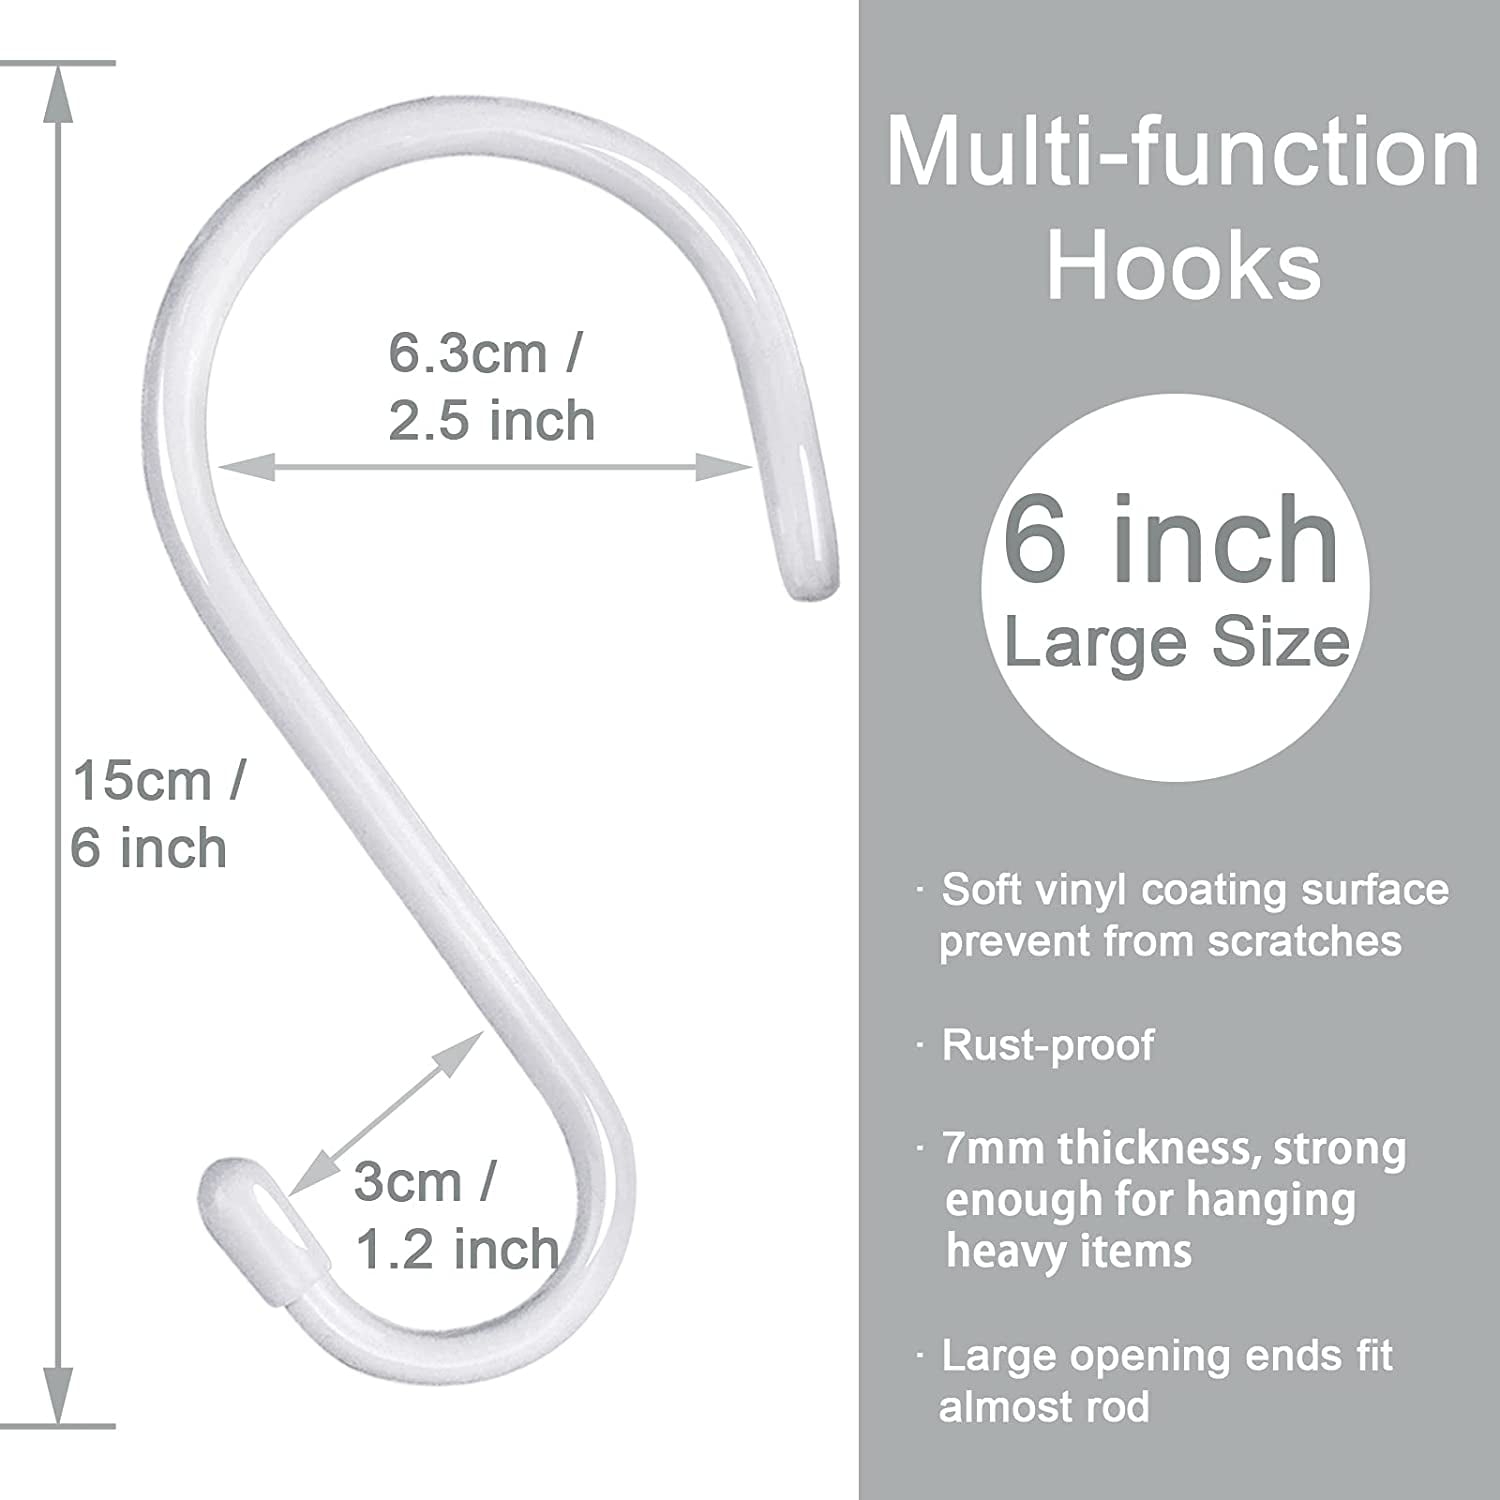 8 Pack 6 inch White S Hooks for Hanging, Large Vinyl Coated Metal S Hooks  Heavy Duty, Non Slip Rubber Coated Closet Rod Hooks for Hanging Jeans,Plants,Purse,Clothes,Bags,Pans,Pots,Cups,Towels  